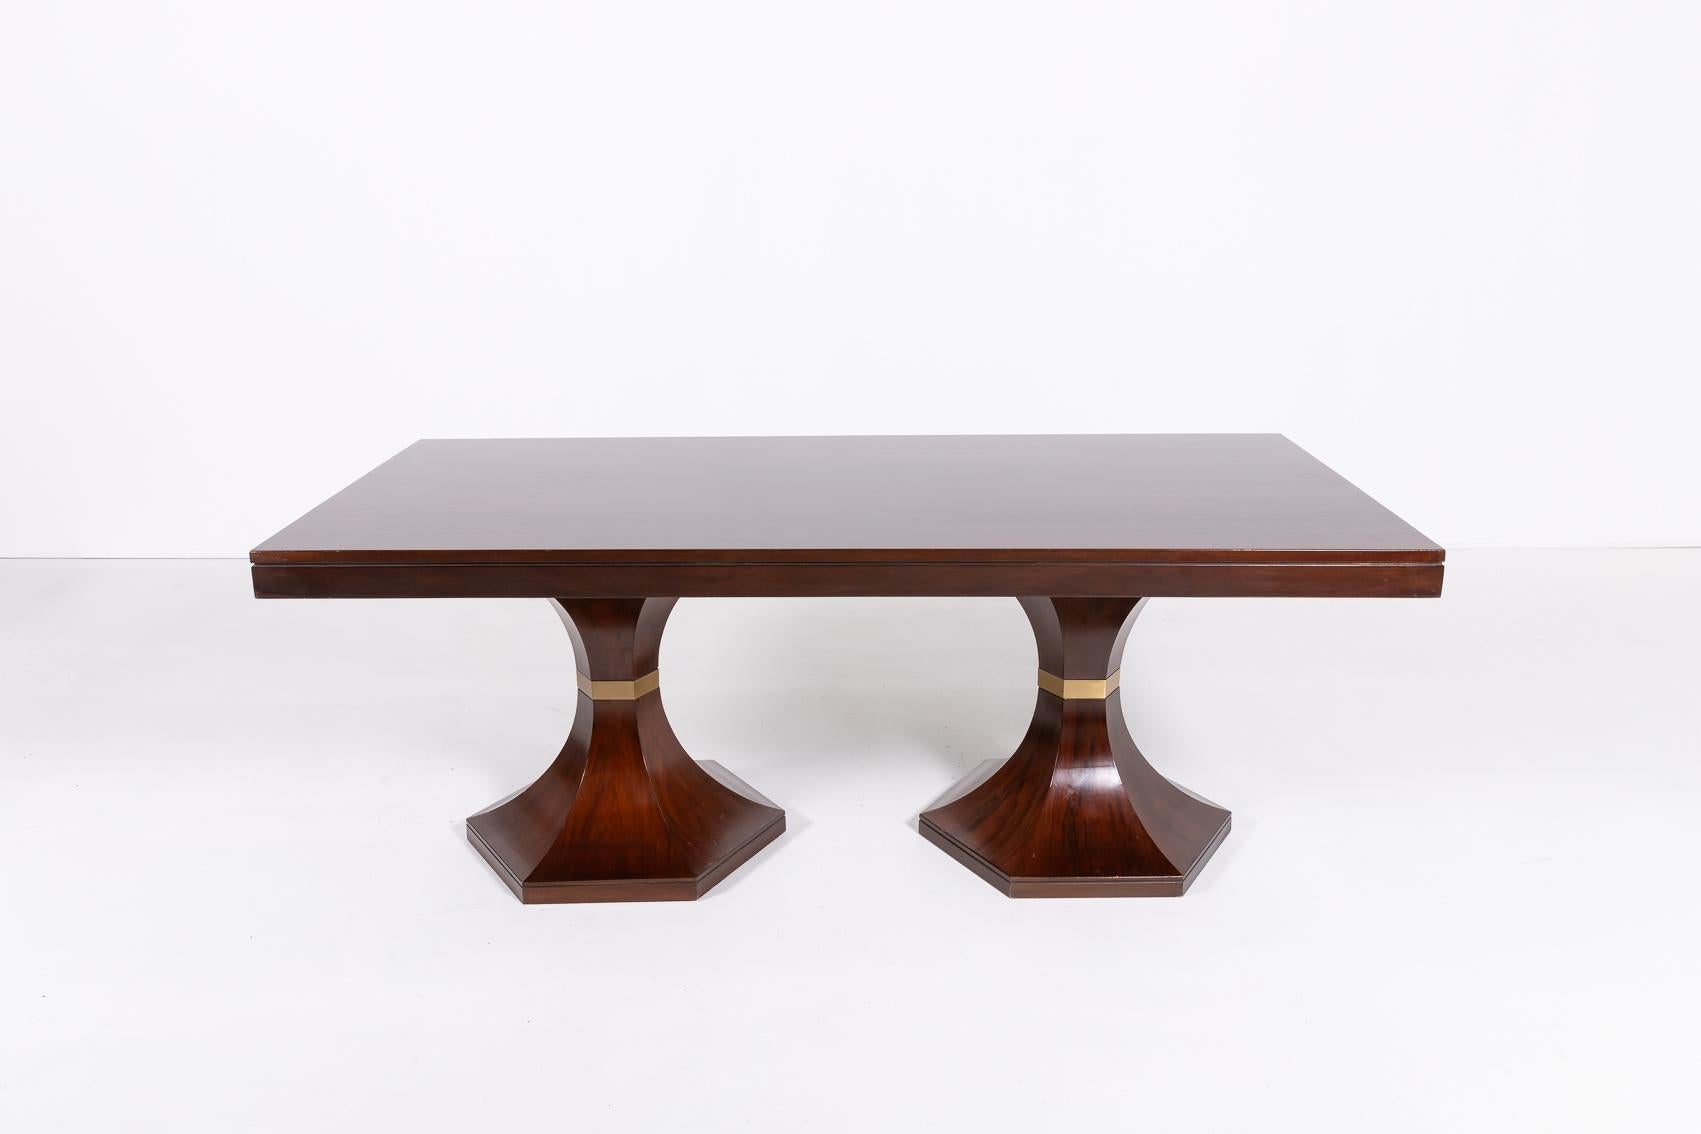 Lacquered Italian Mid-Century Modern table by Carlo de Carli, 1960s For Sale